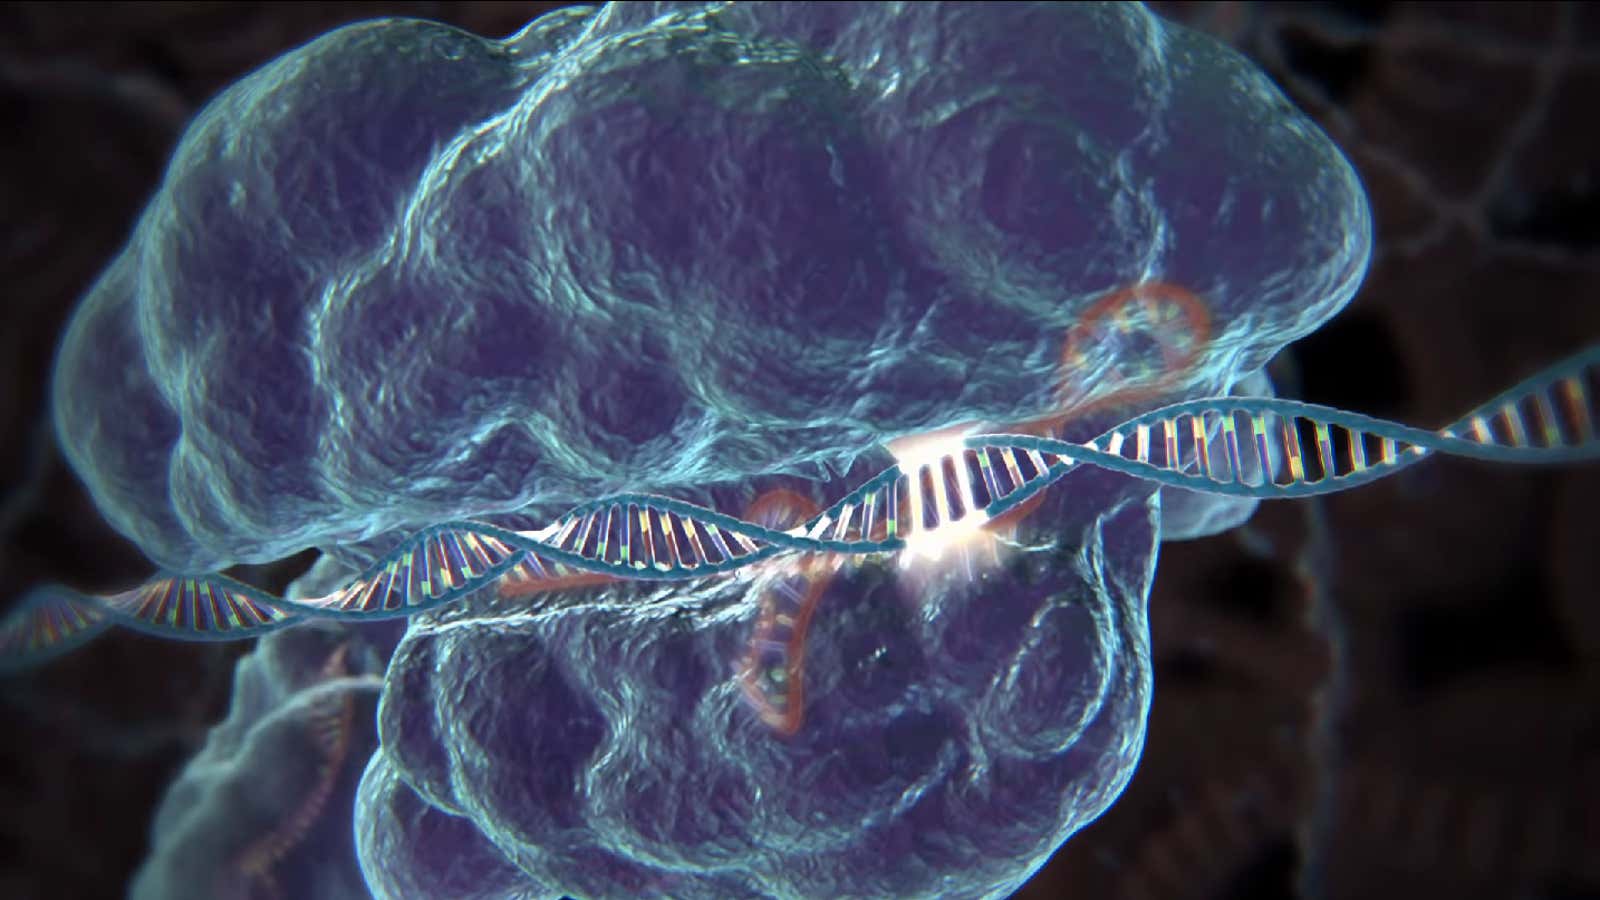 A CRISPR sequence locks on to its target DNA. Don’t worry, we’ll explain below.